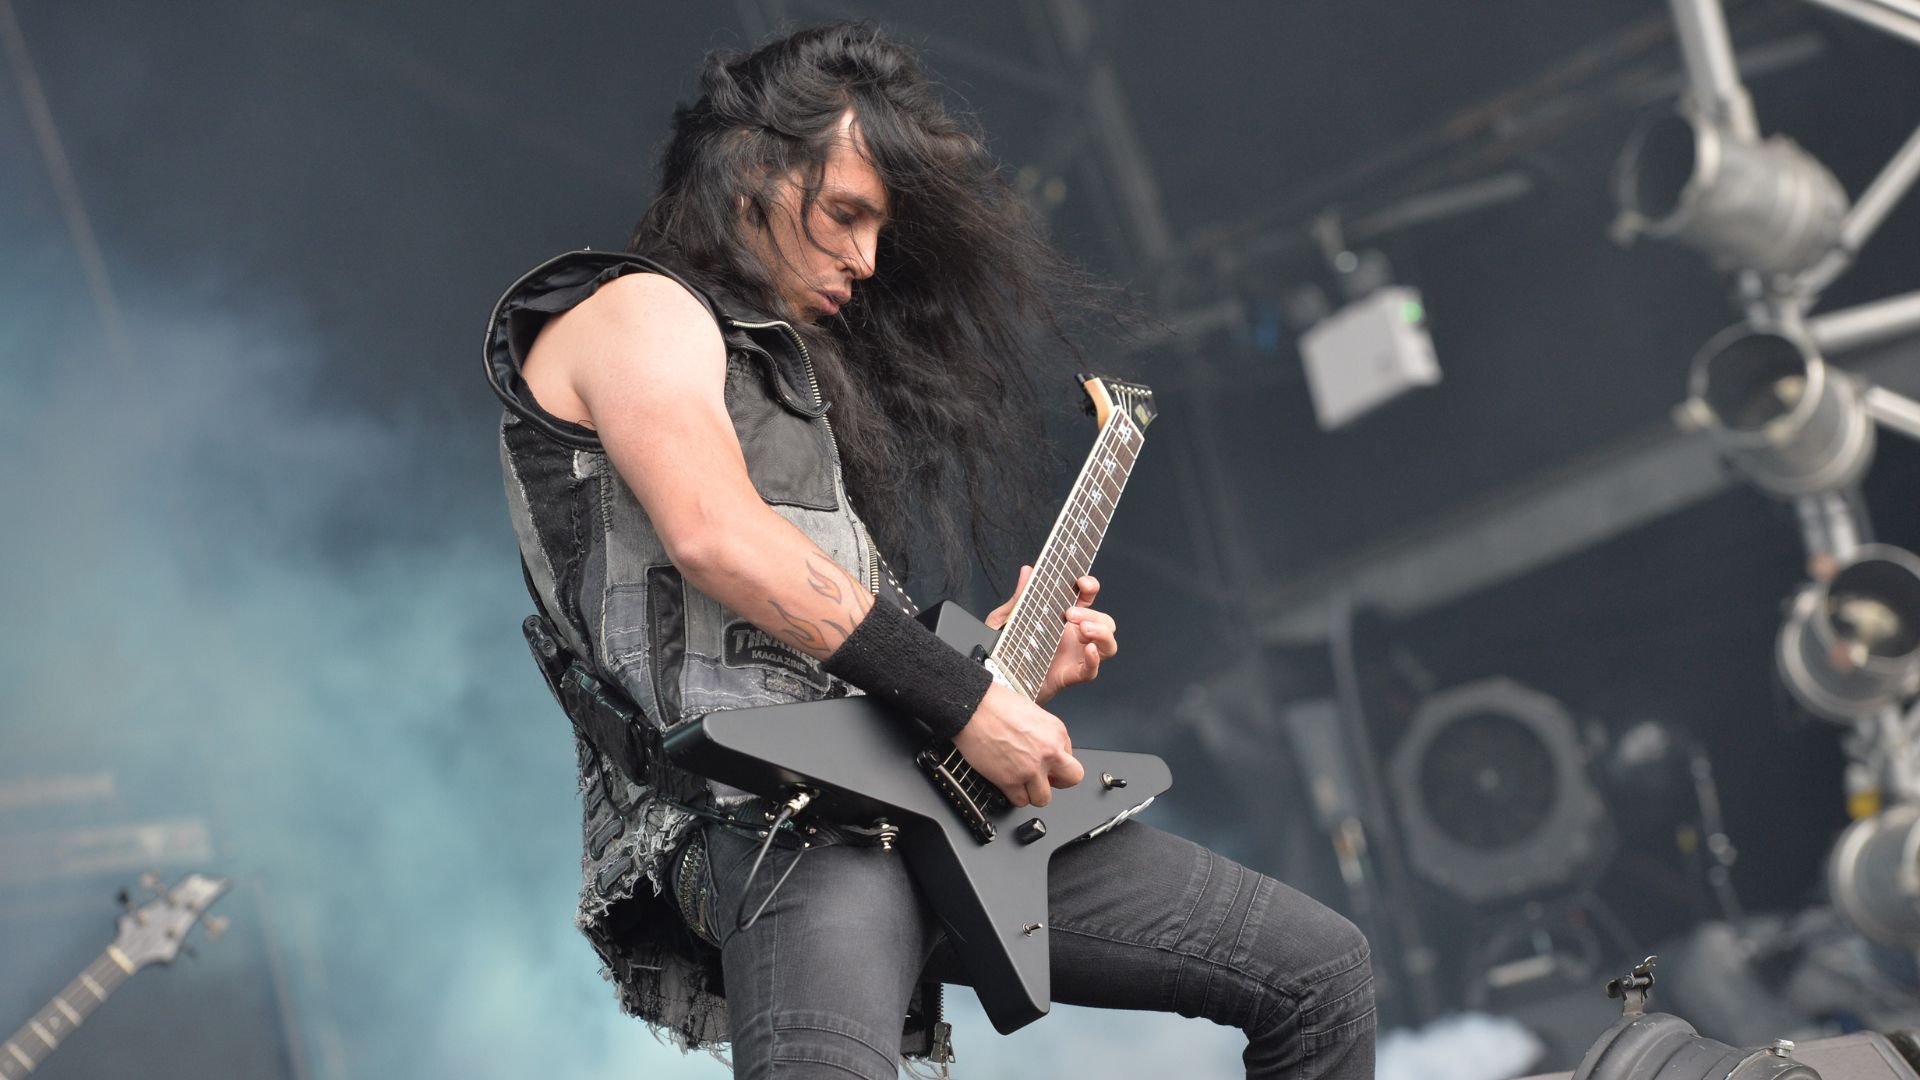 “I was approached to audition for Megadeth and Machine Head, but I’m not sure I’m made for being a hired gun”: Gus G explains why he turned down the opportunity to audition for two of the biggest metal bands in the game